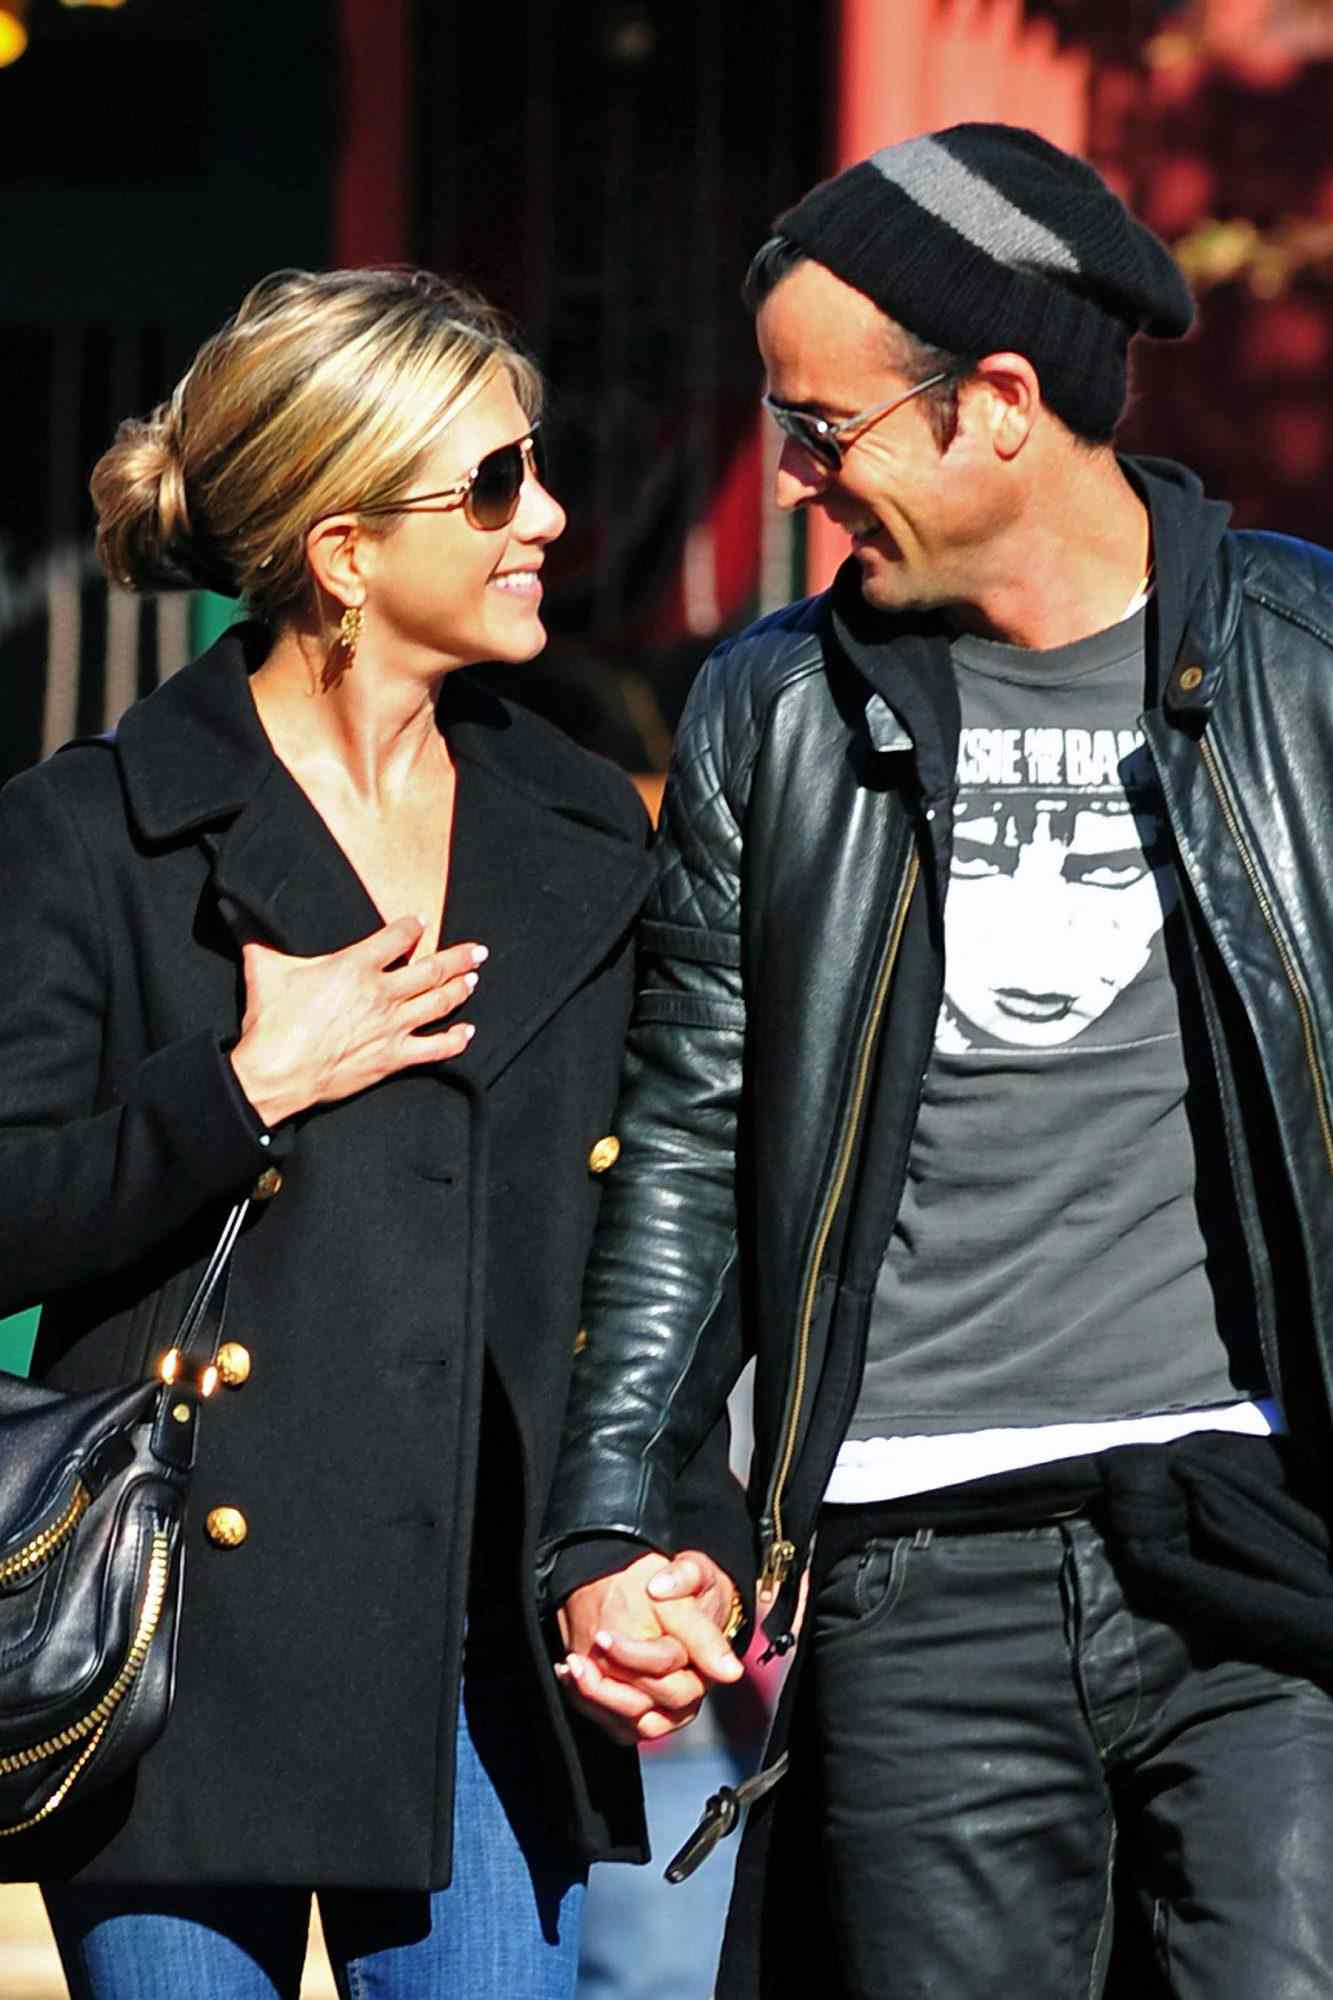 Jennifer Aniston and Justin Theroux in New York City on Sept. 18, 2011